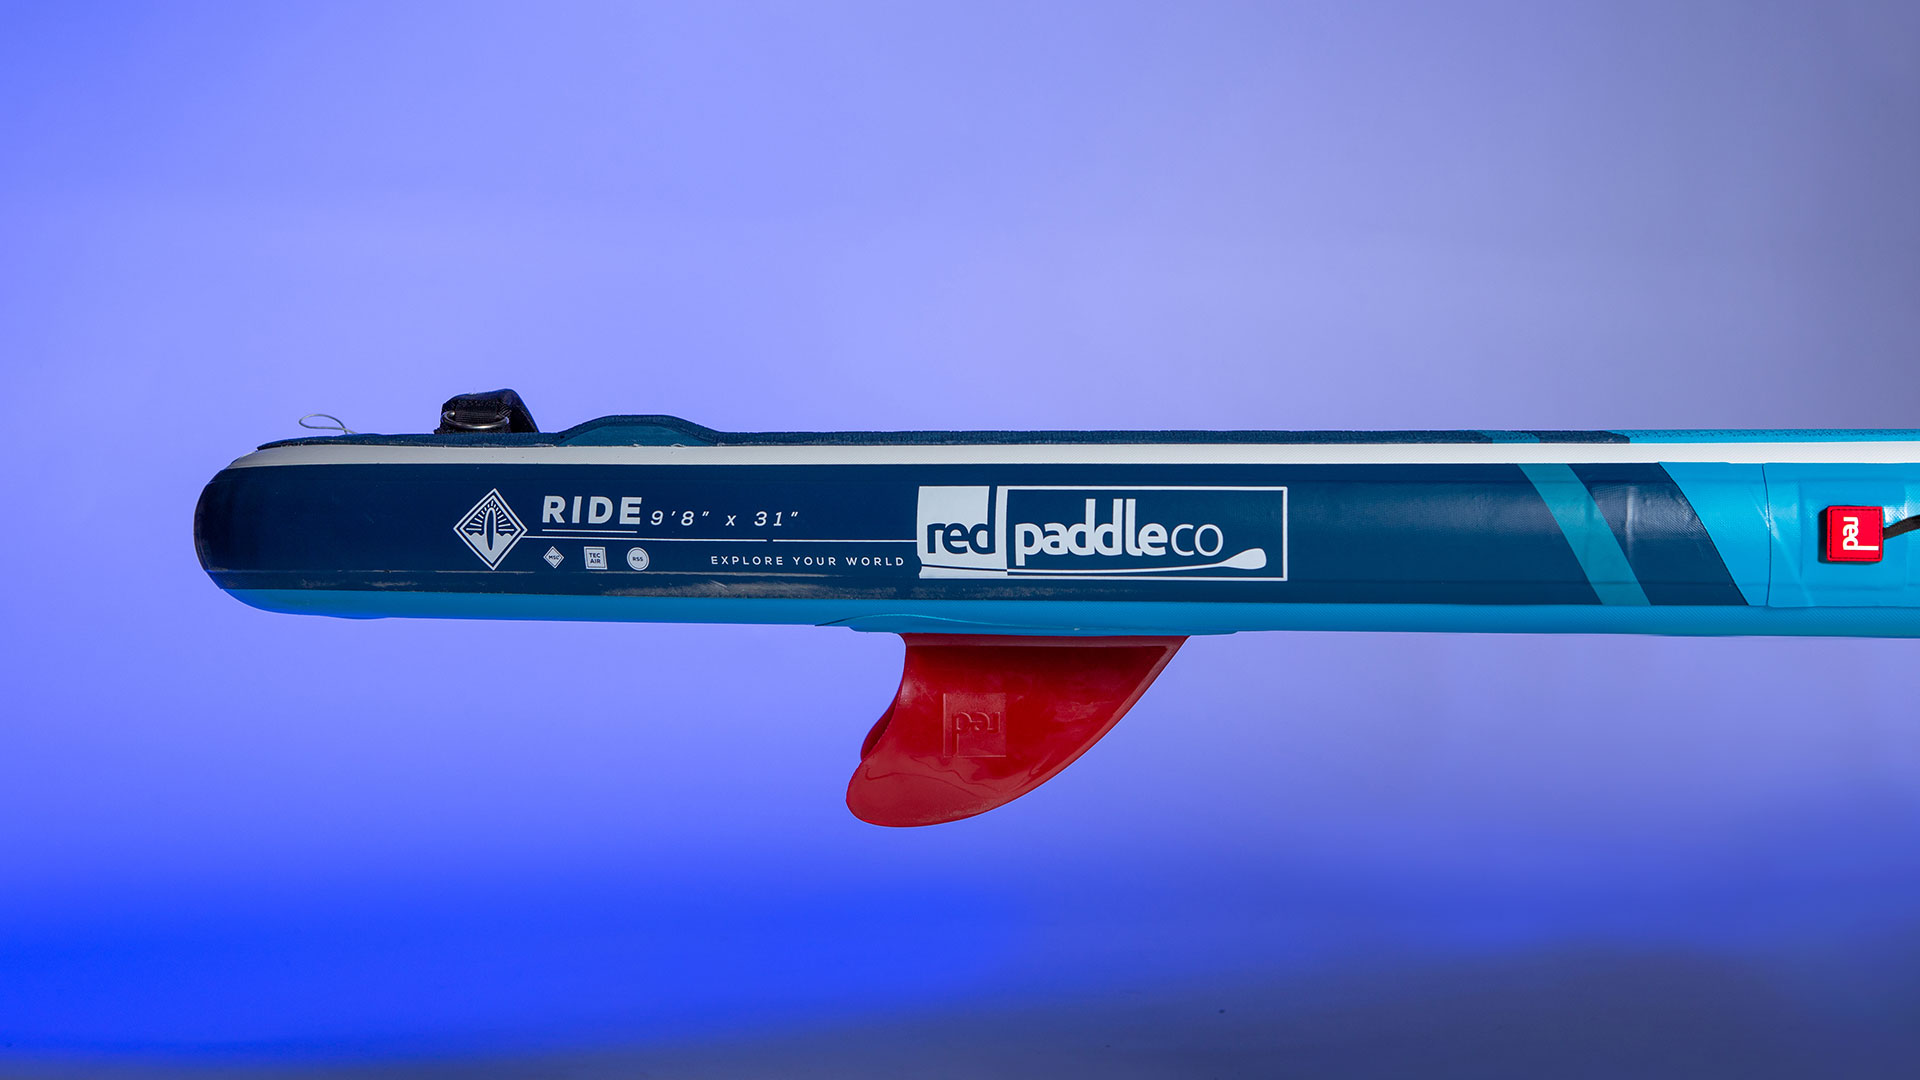 red-paddle-co-paddleboard-ride-98-7